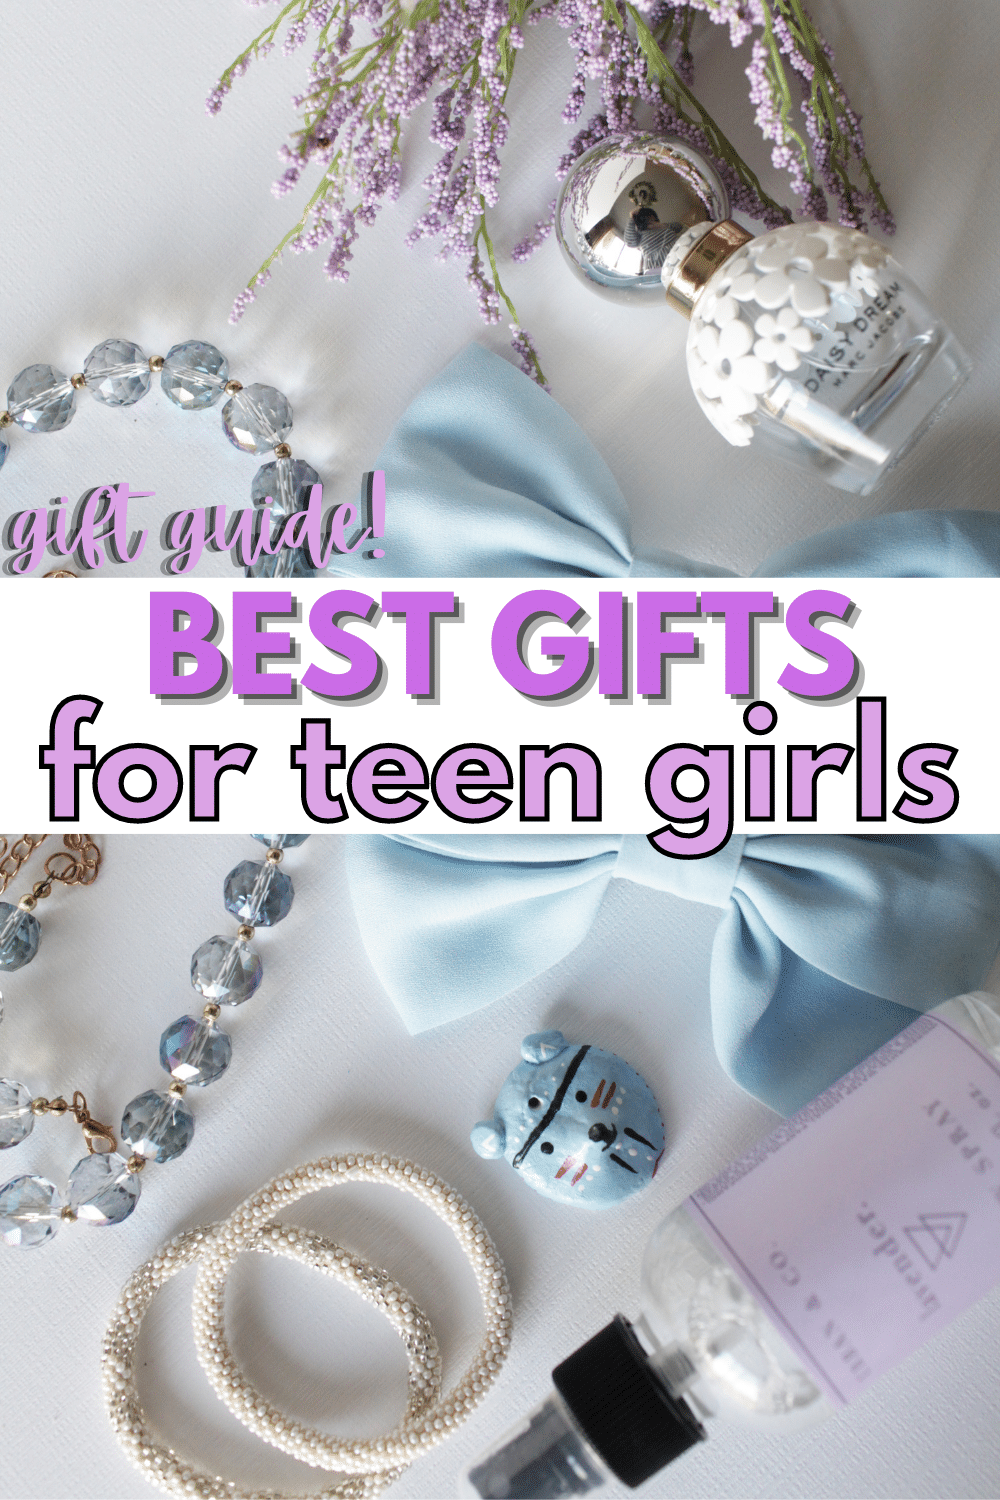 Looking for the perfect gifts for teen girls? Look no further! Our collection of the best presents for teen girls is sure to impress. From trendy accessories to tech gadgets, we have it all. Discover